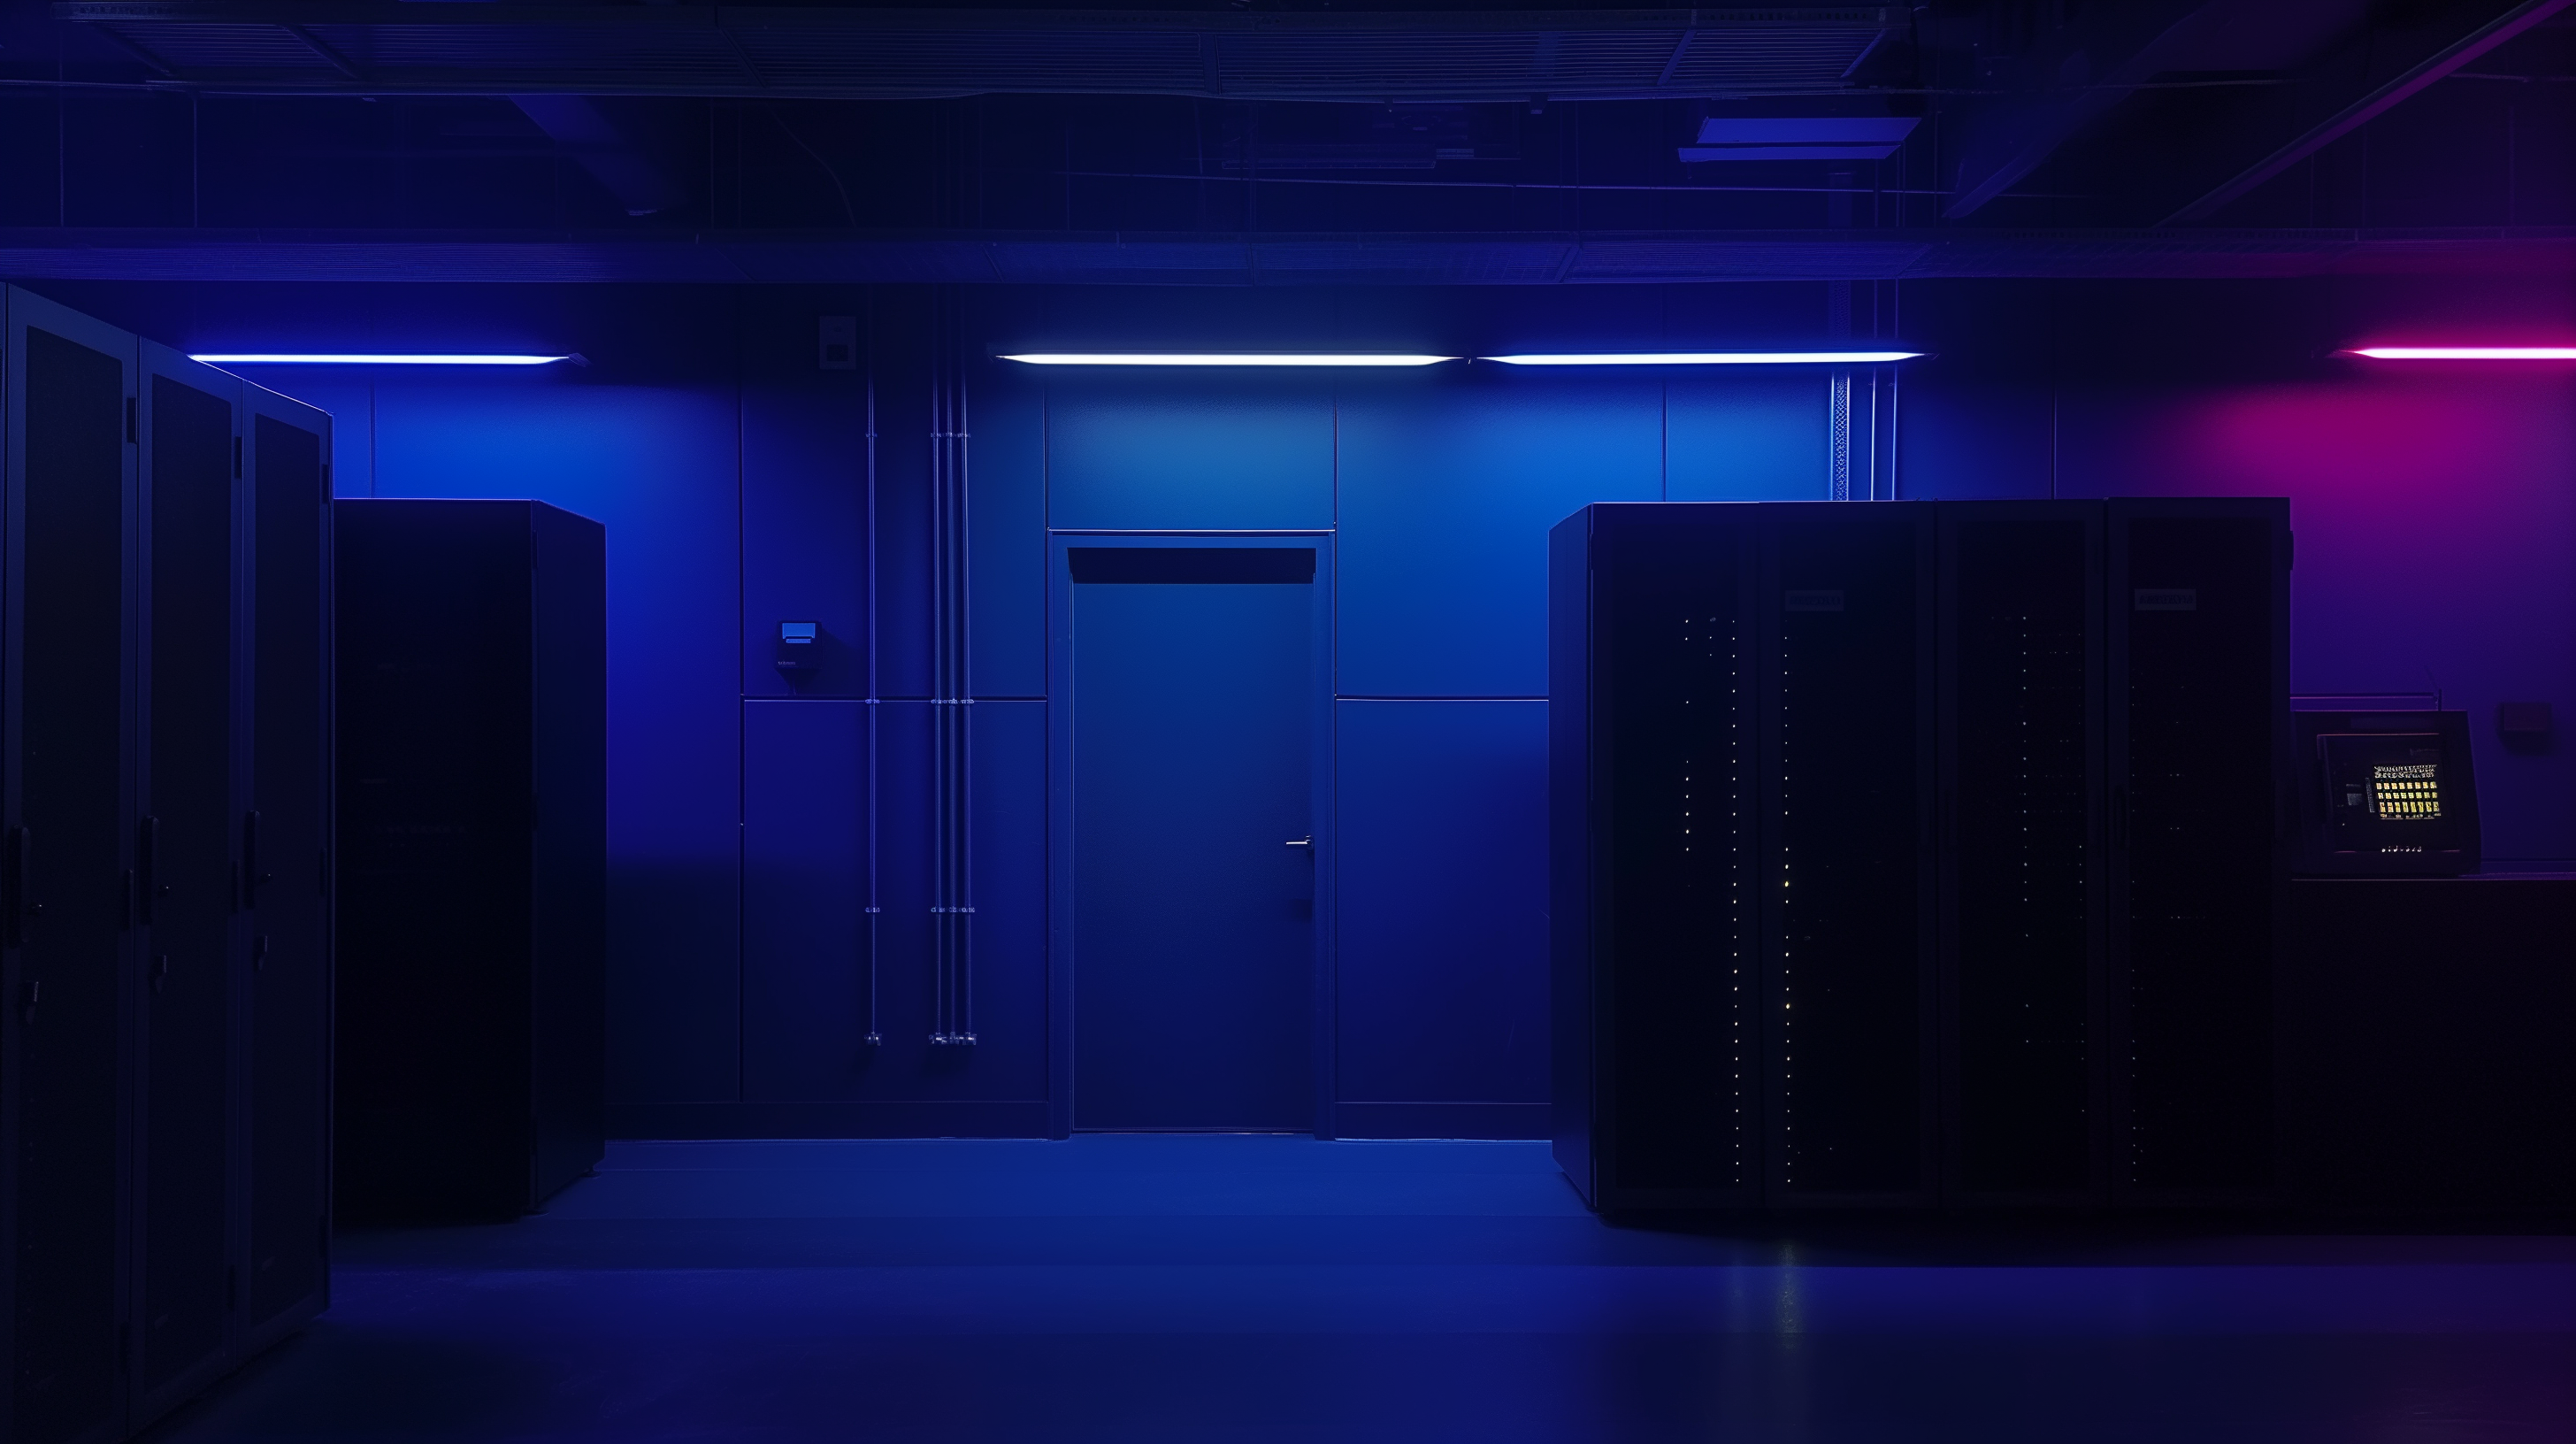 Abstract image of a datacenter